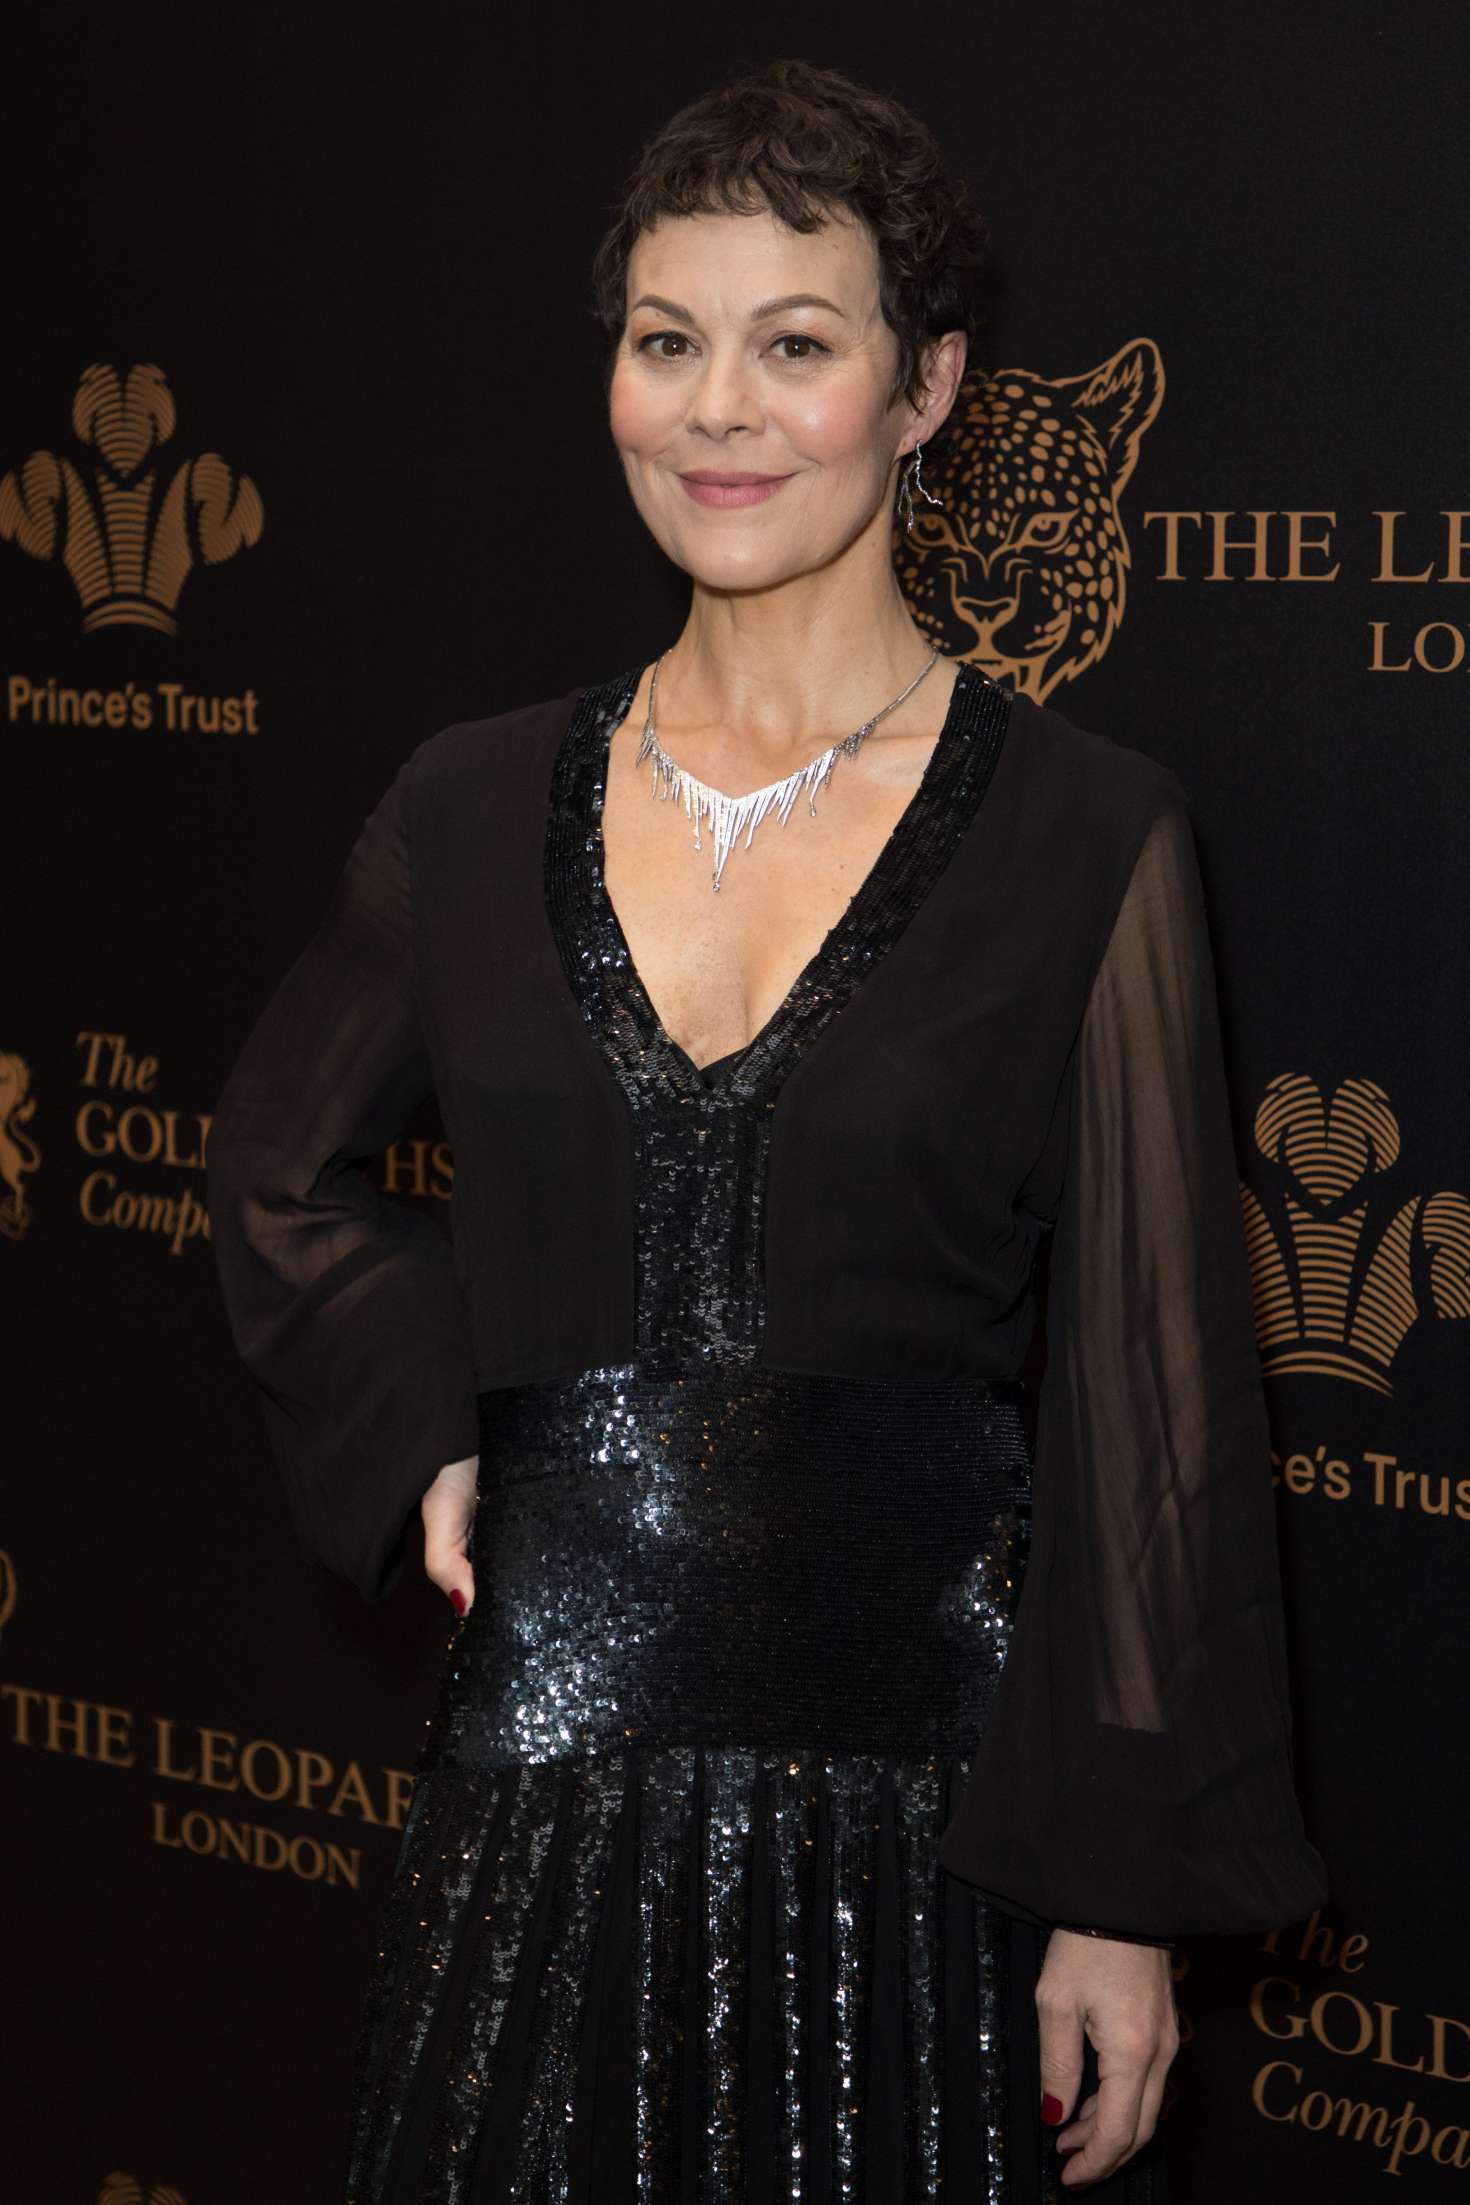 Helen McCrory - 'The Leopards' Awards in aid of The Prince's Trust Goldsmiths Hall in London